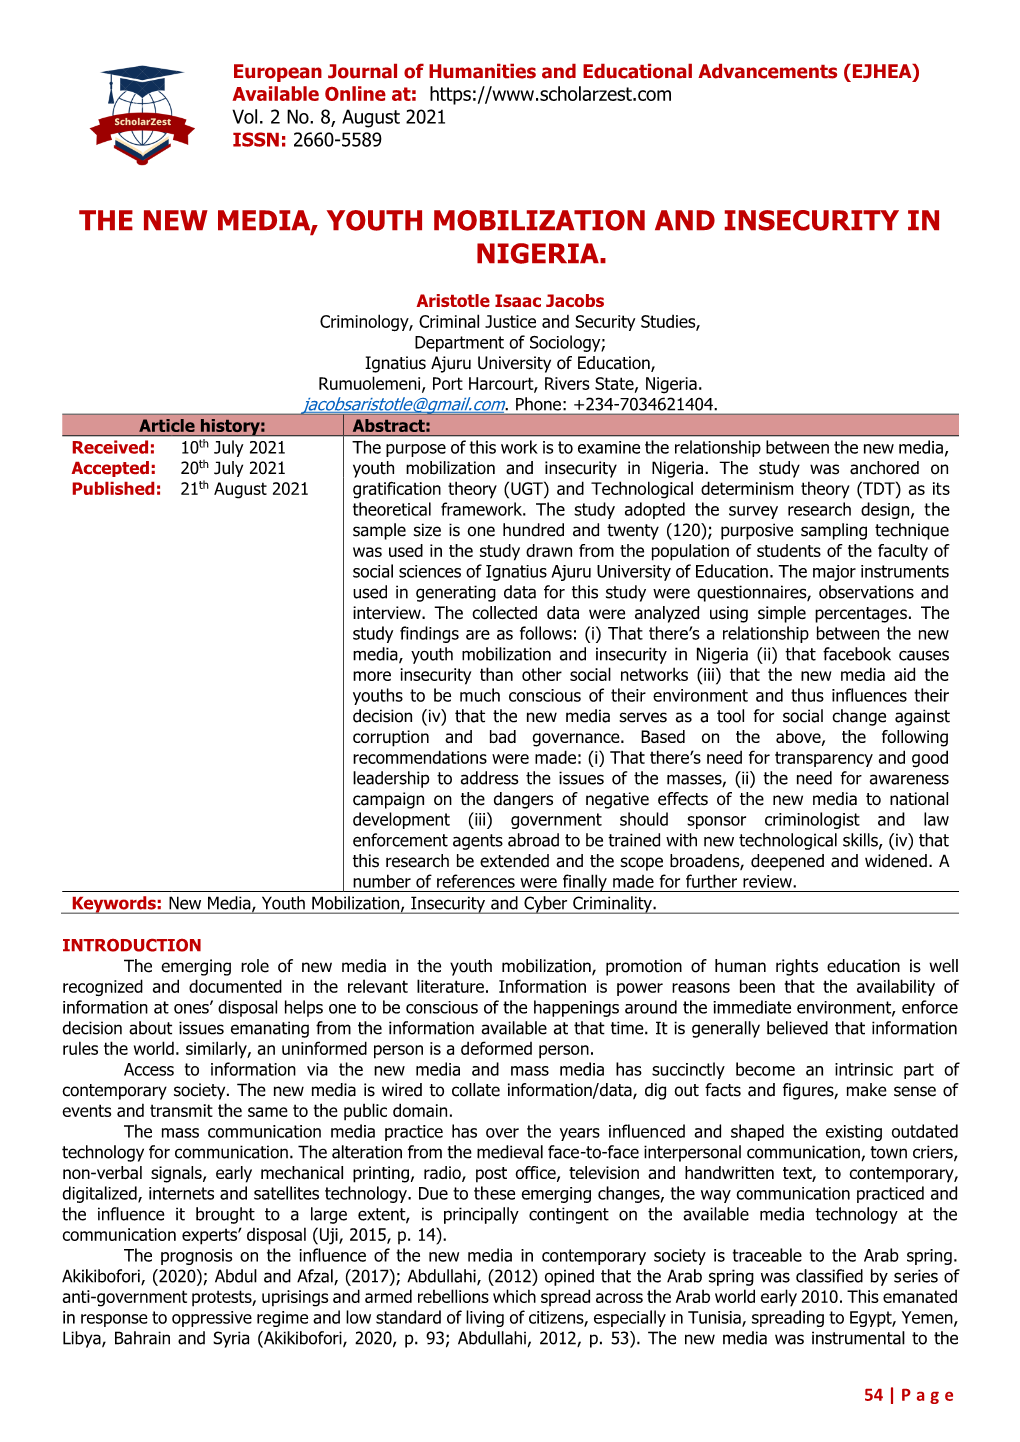 The New Media, Youth Mobilization and Insecurity in Nigeria